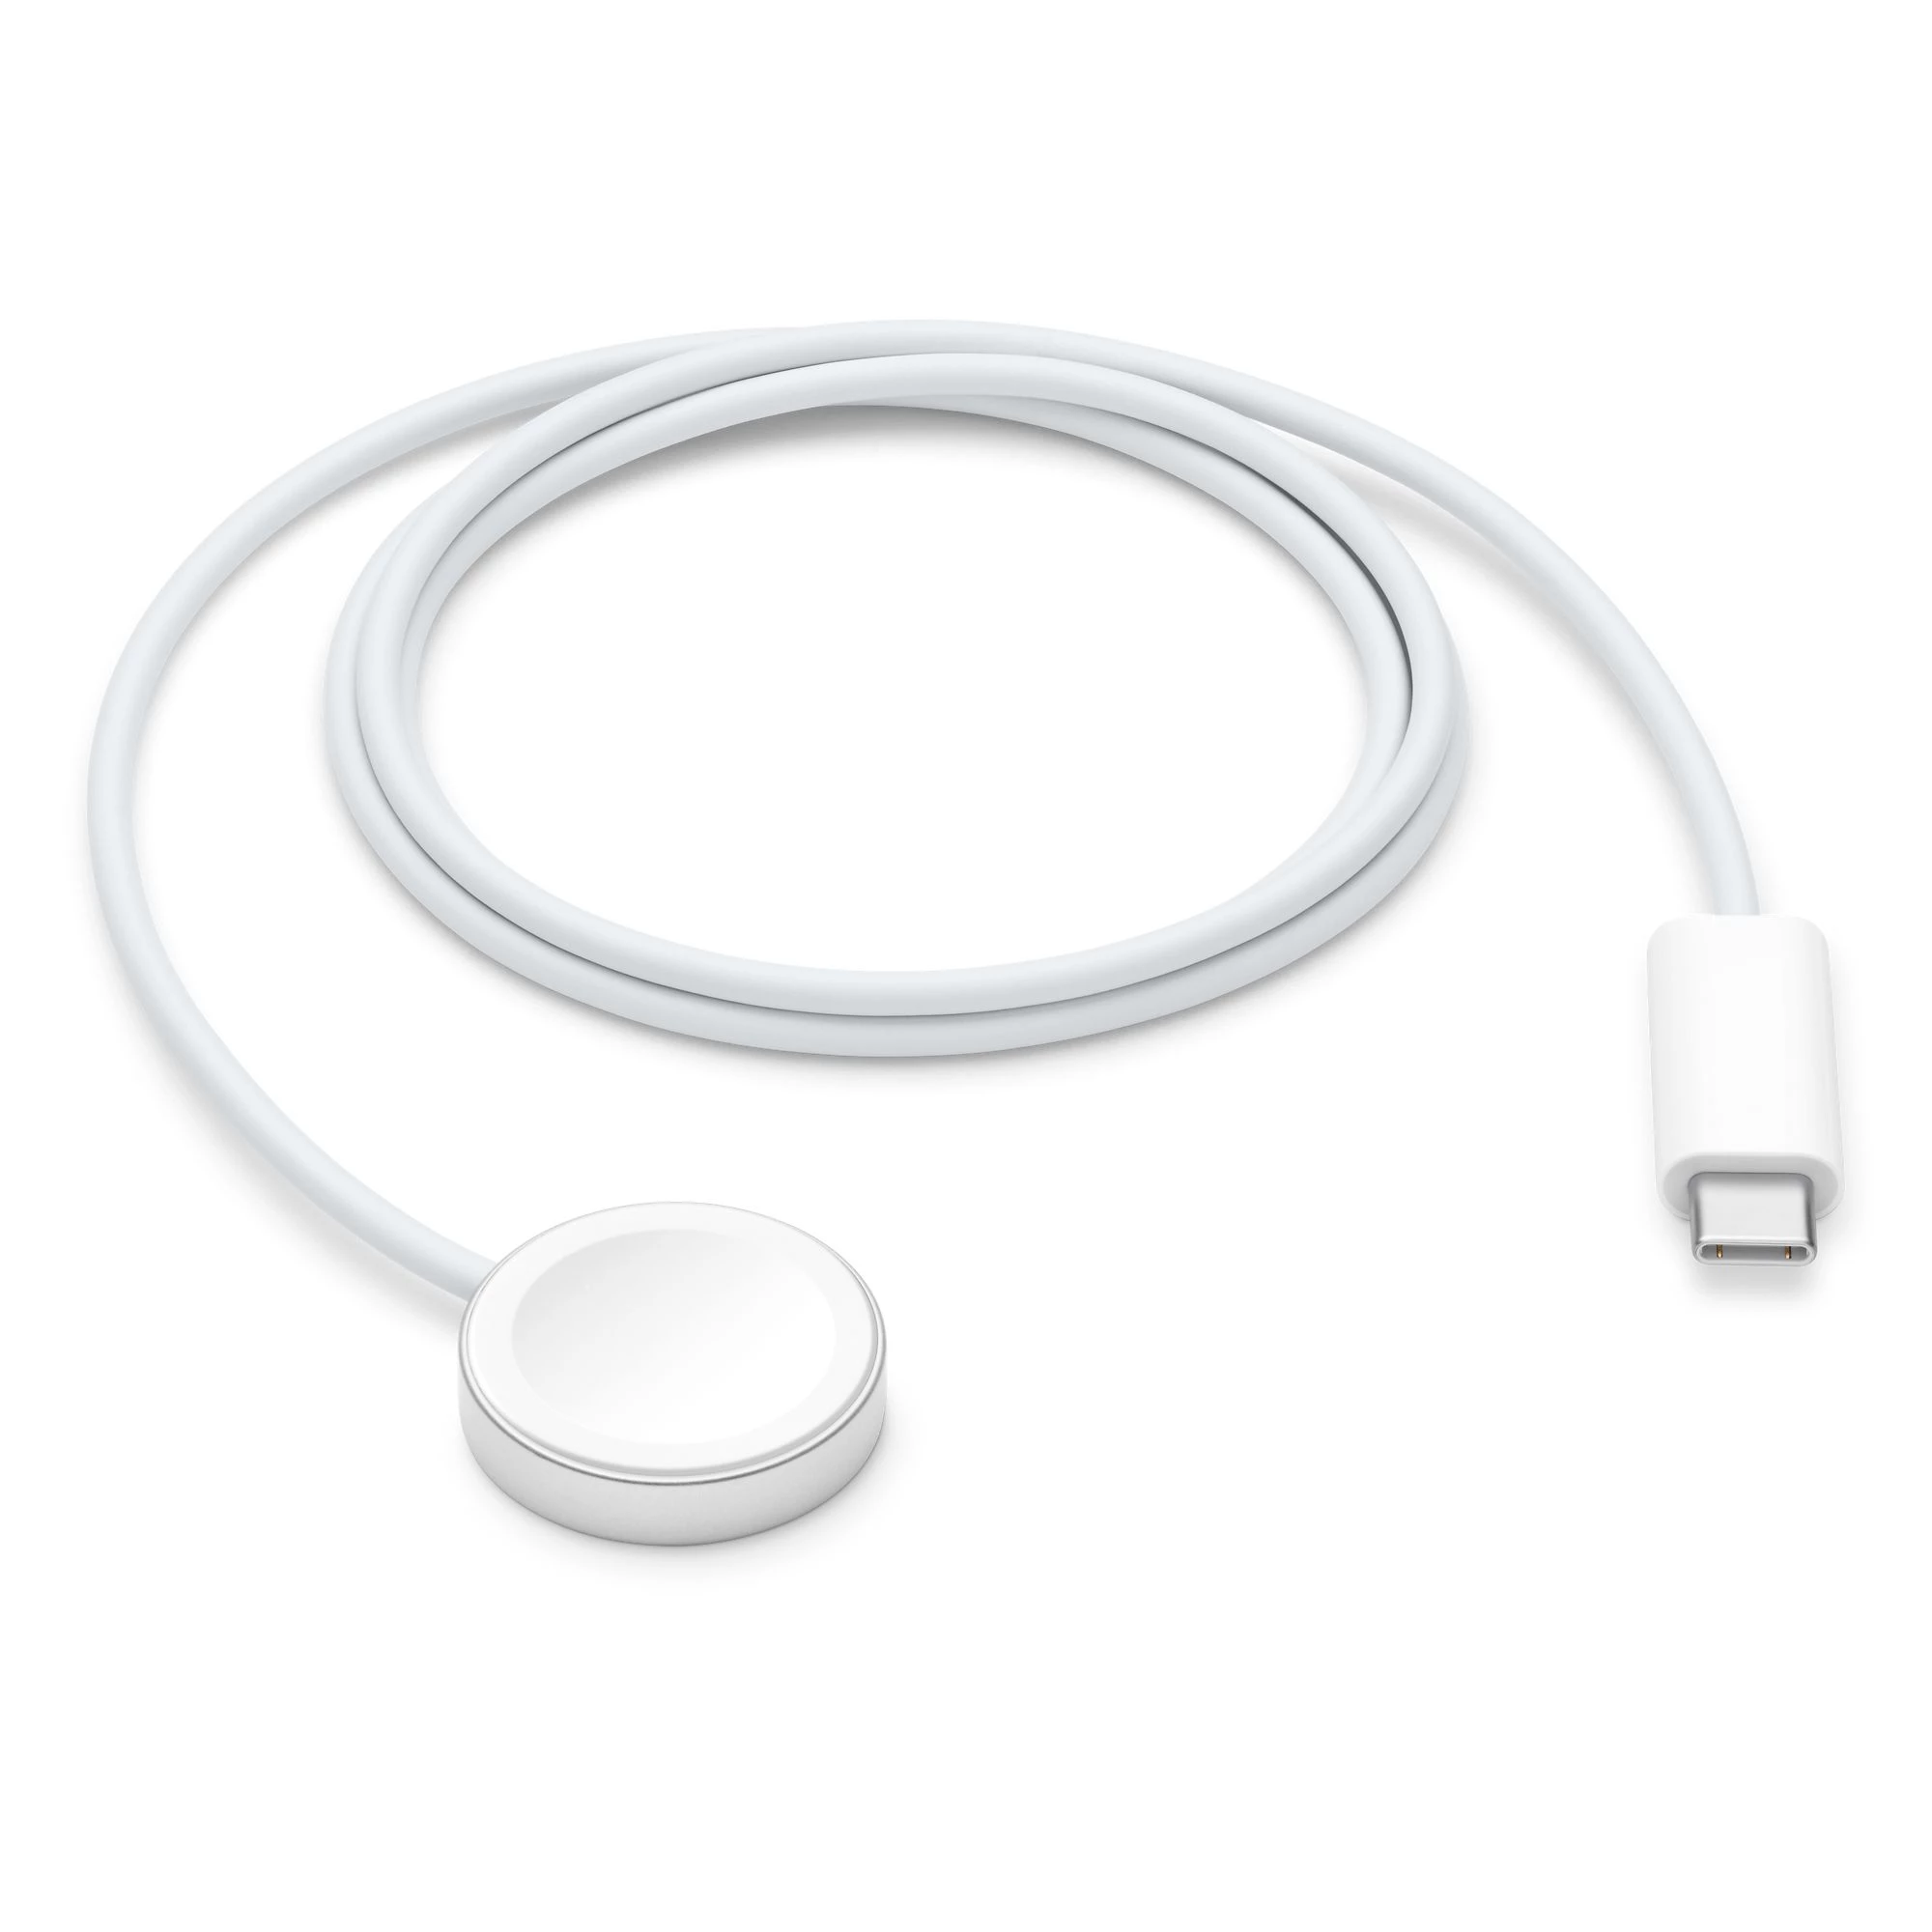 Apple Watch Magnetic Charger to USB-C Cable (1 m) (MX2H2)